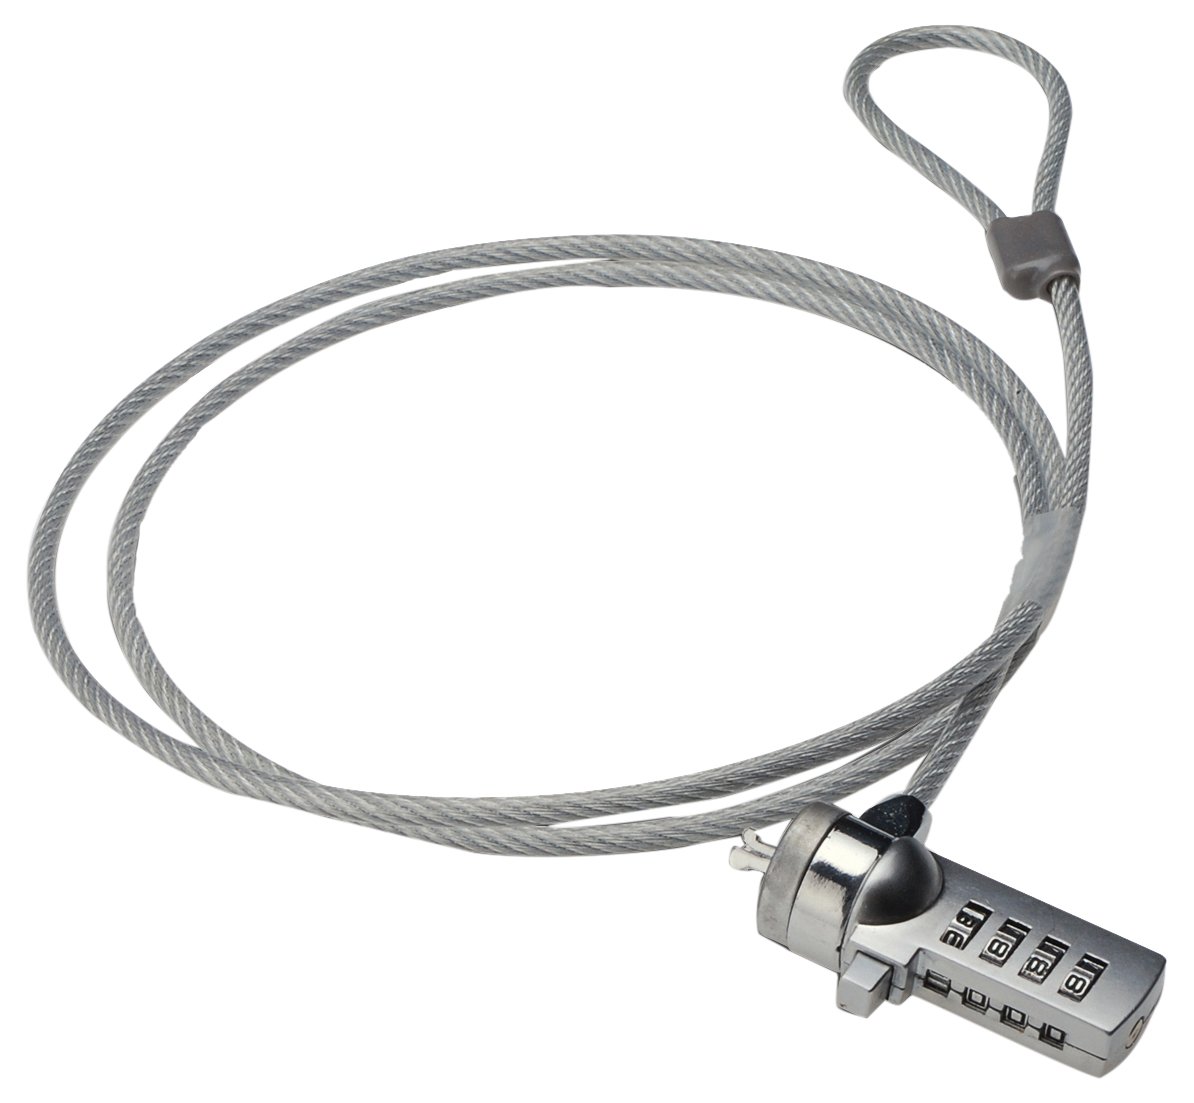 NB COMBINATION SAFETY CABLE